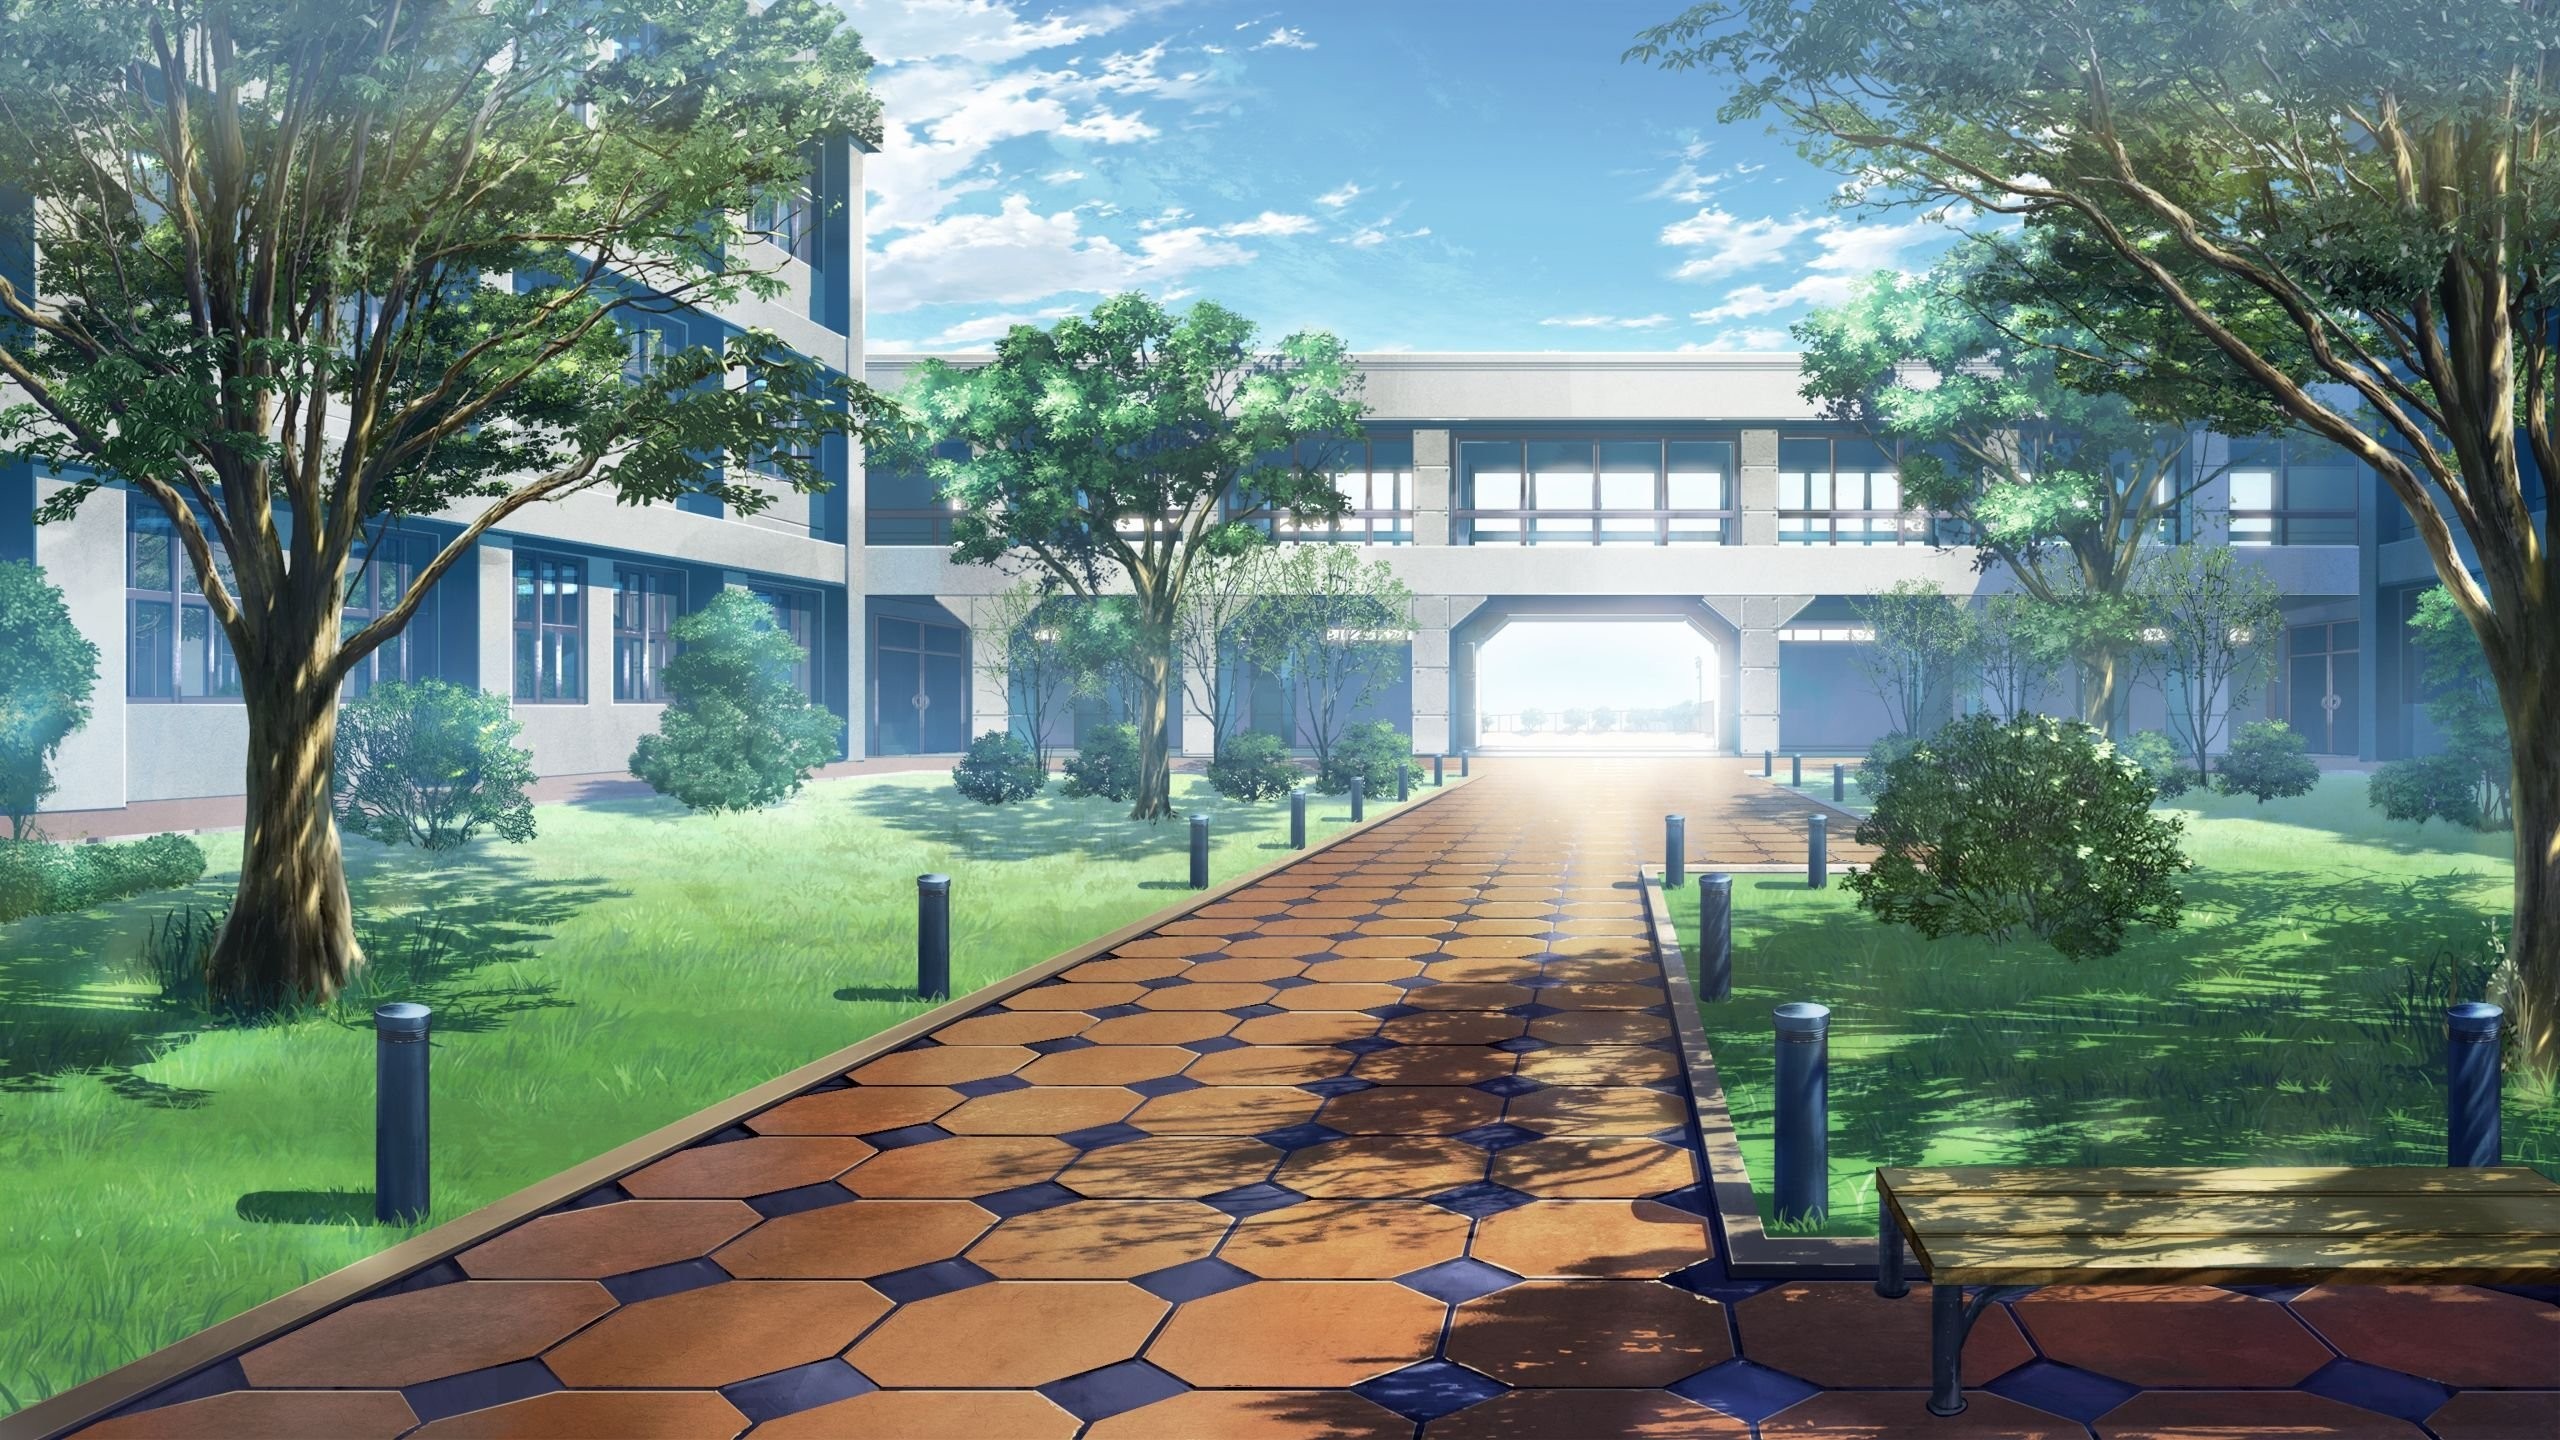 anime school wallpaper,property,building,architecture,house,real estate